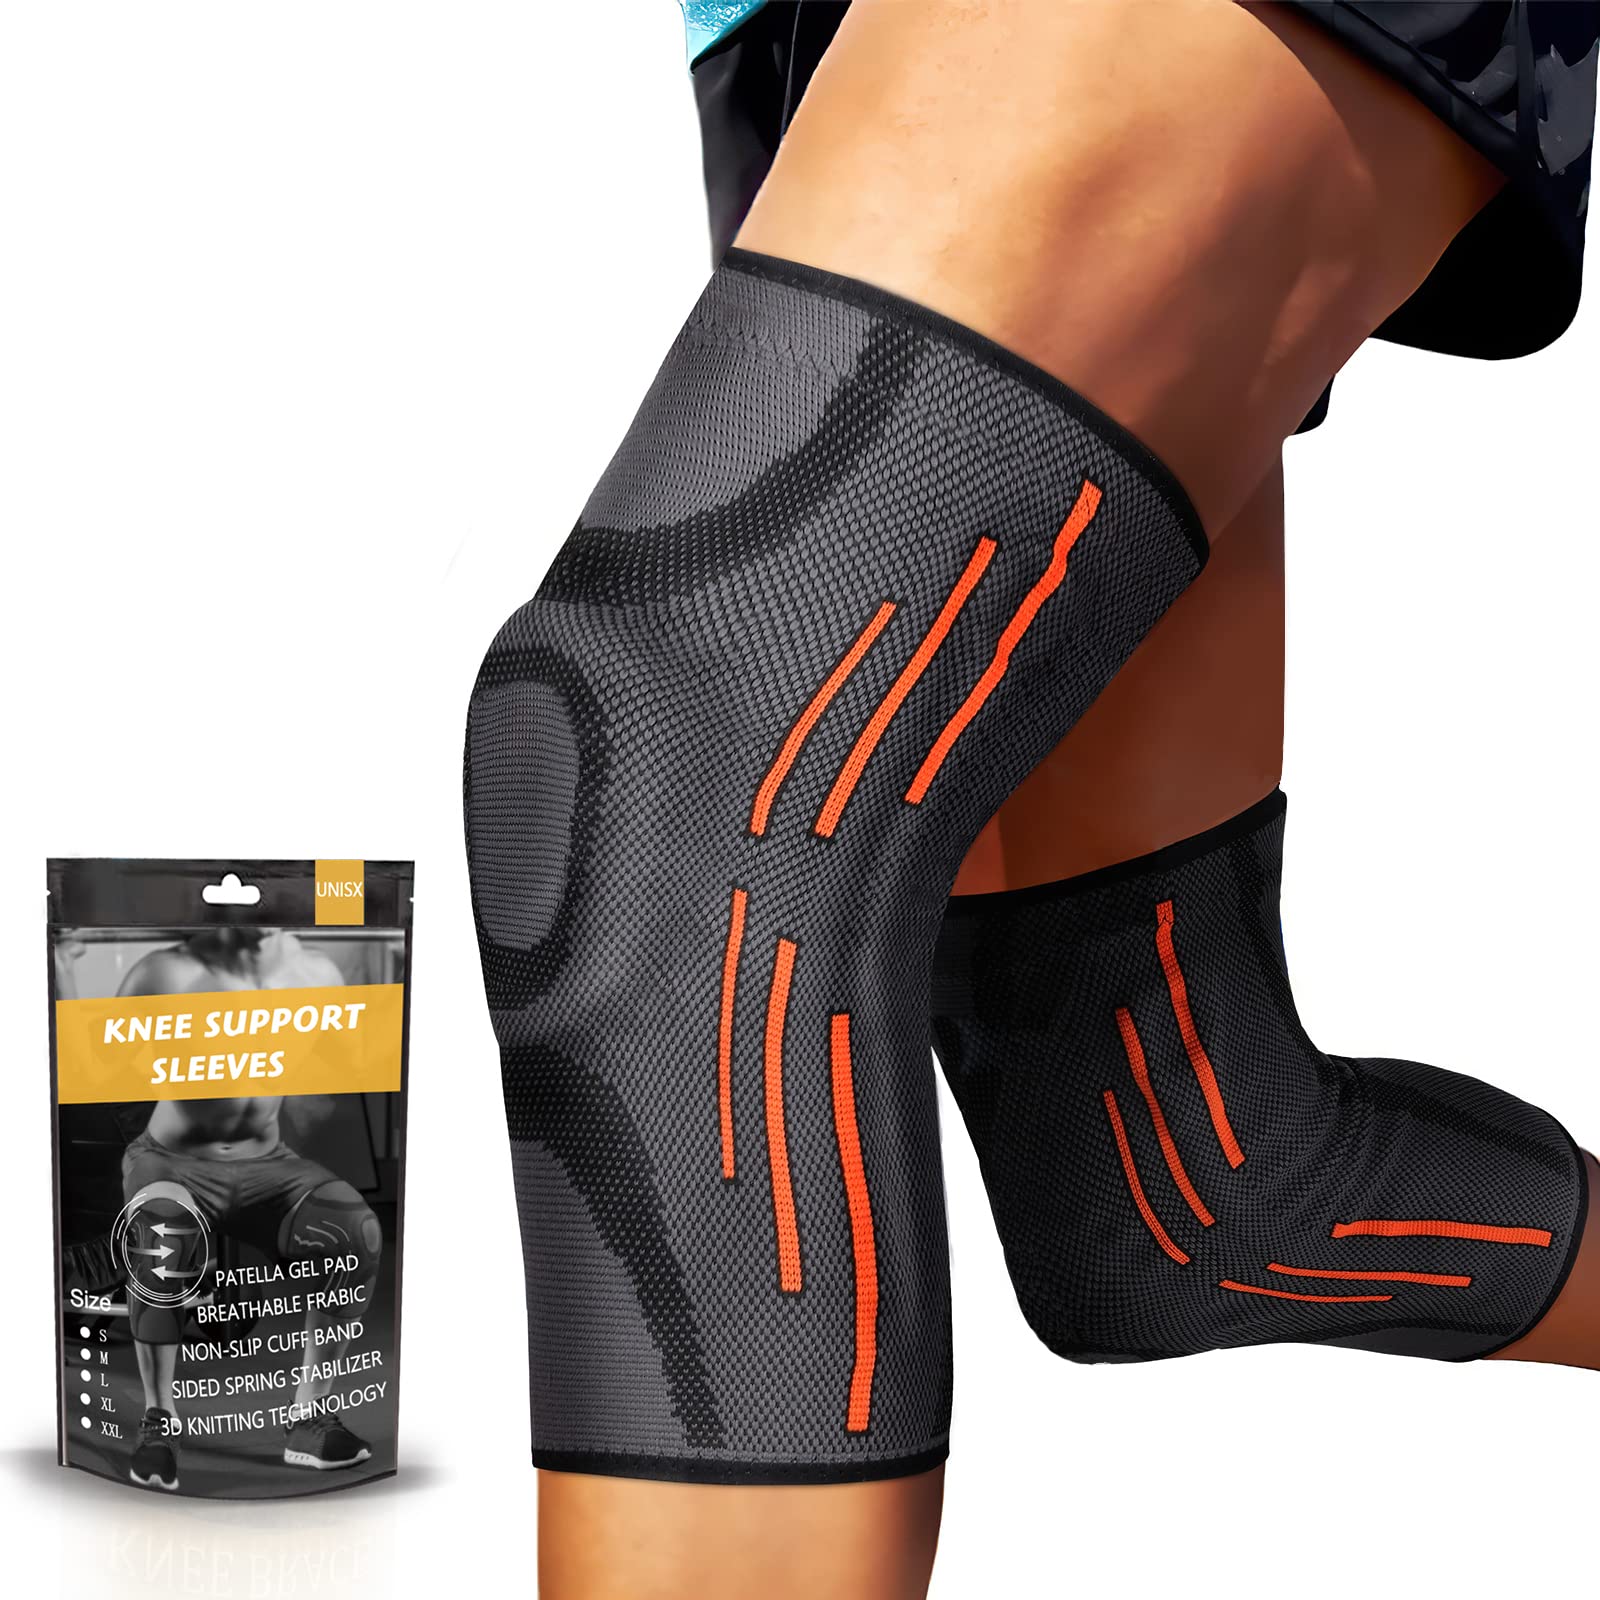 Knee Support Enhanced Compression with Gel Insert and Flexible